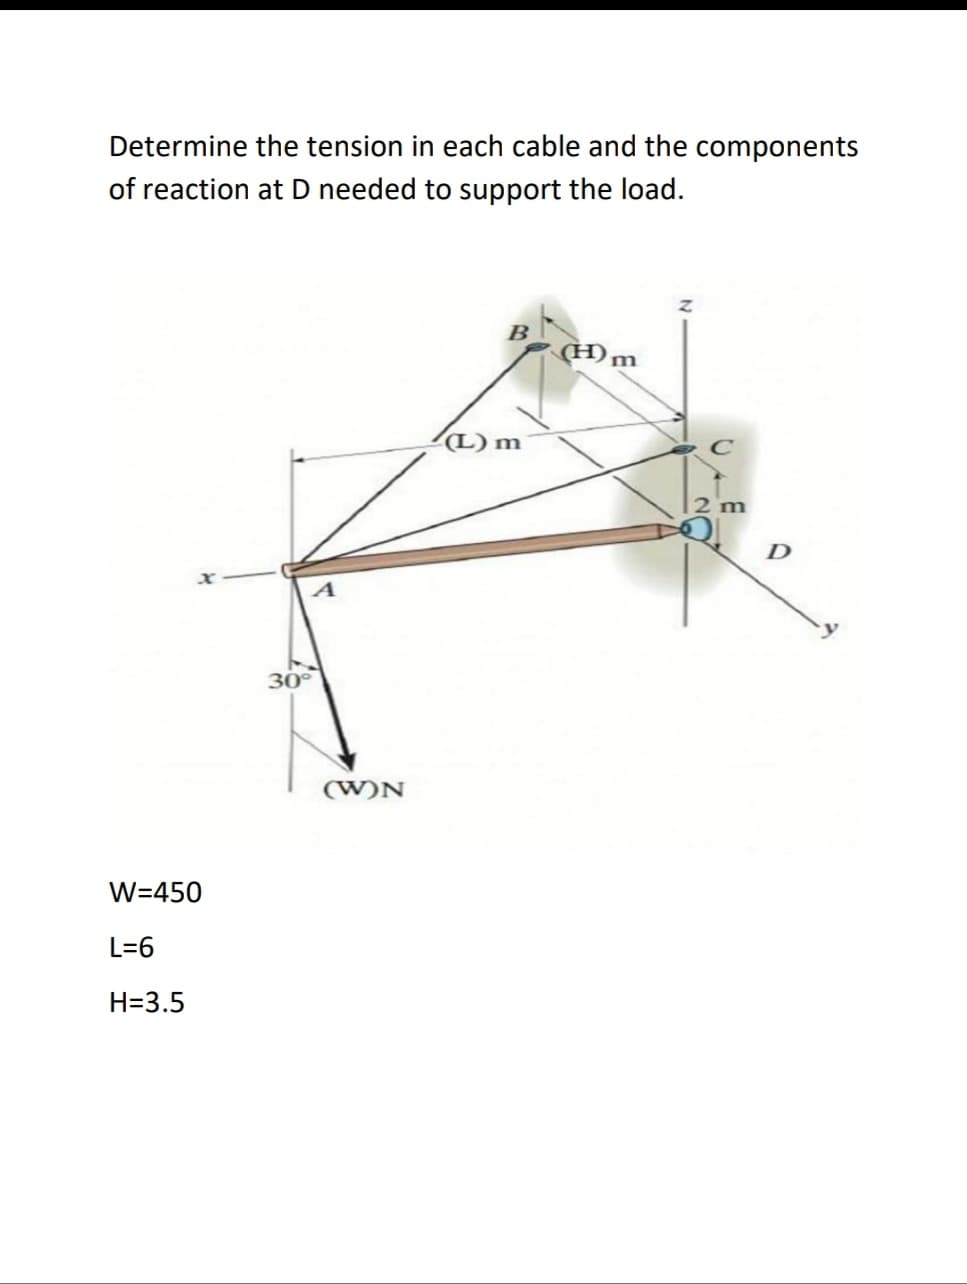 Determine the tension in each cable and the components
of reaction at D needed to support the load.
B
(H)m
(L) m
2 m
D
30
(W)N
W=450
L=6
H=3.5
